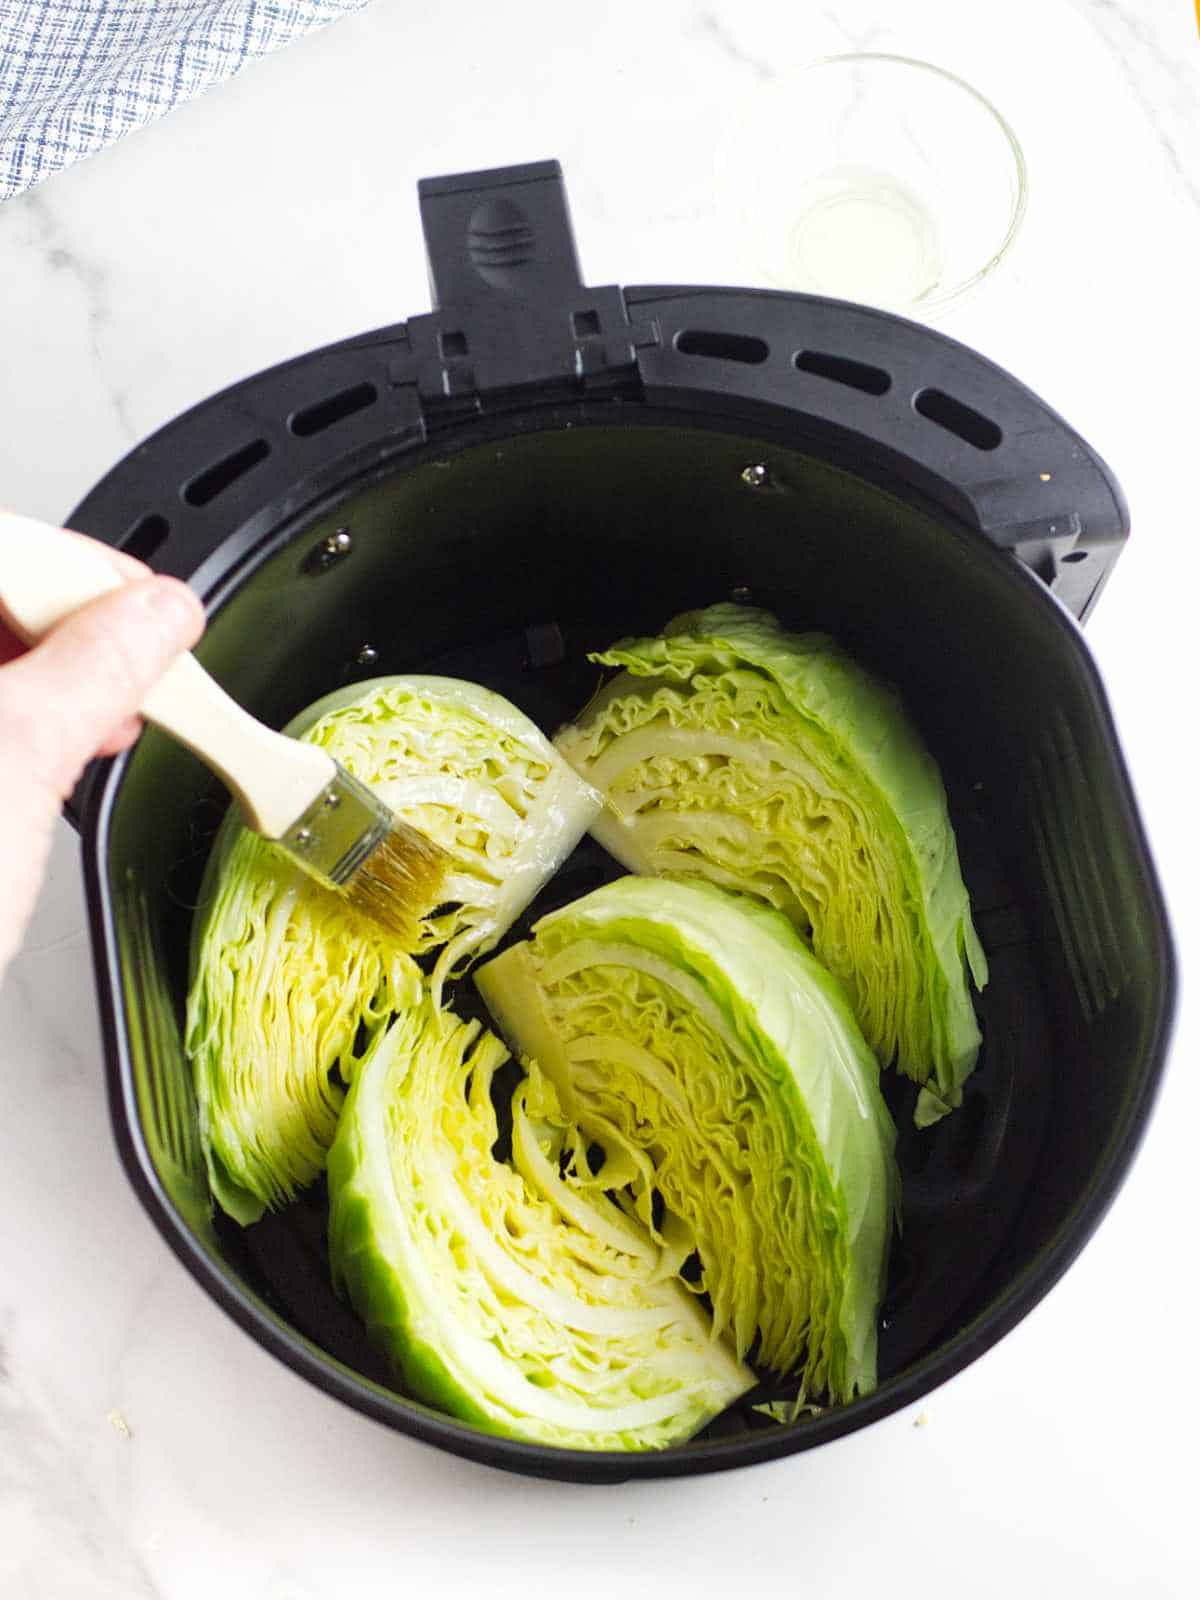 brushing olive oil on cabbage wedges in an air fryer basket.